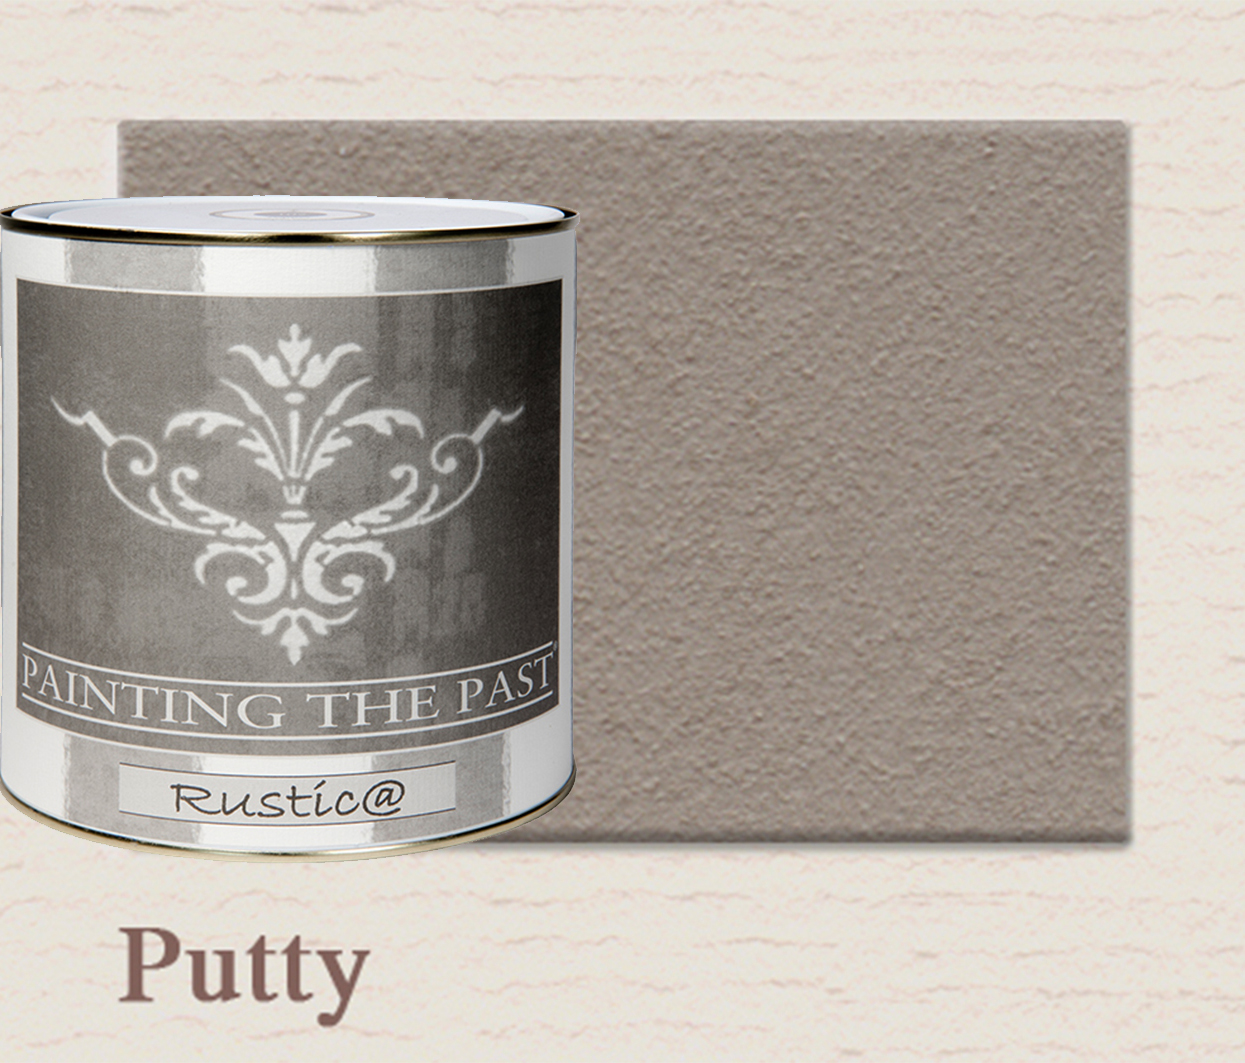 Painting The Past Rustica Putty